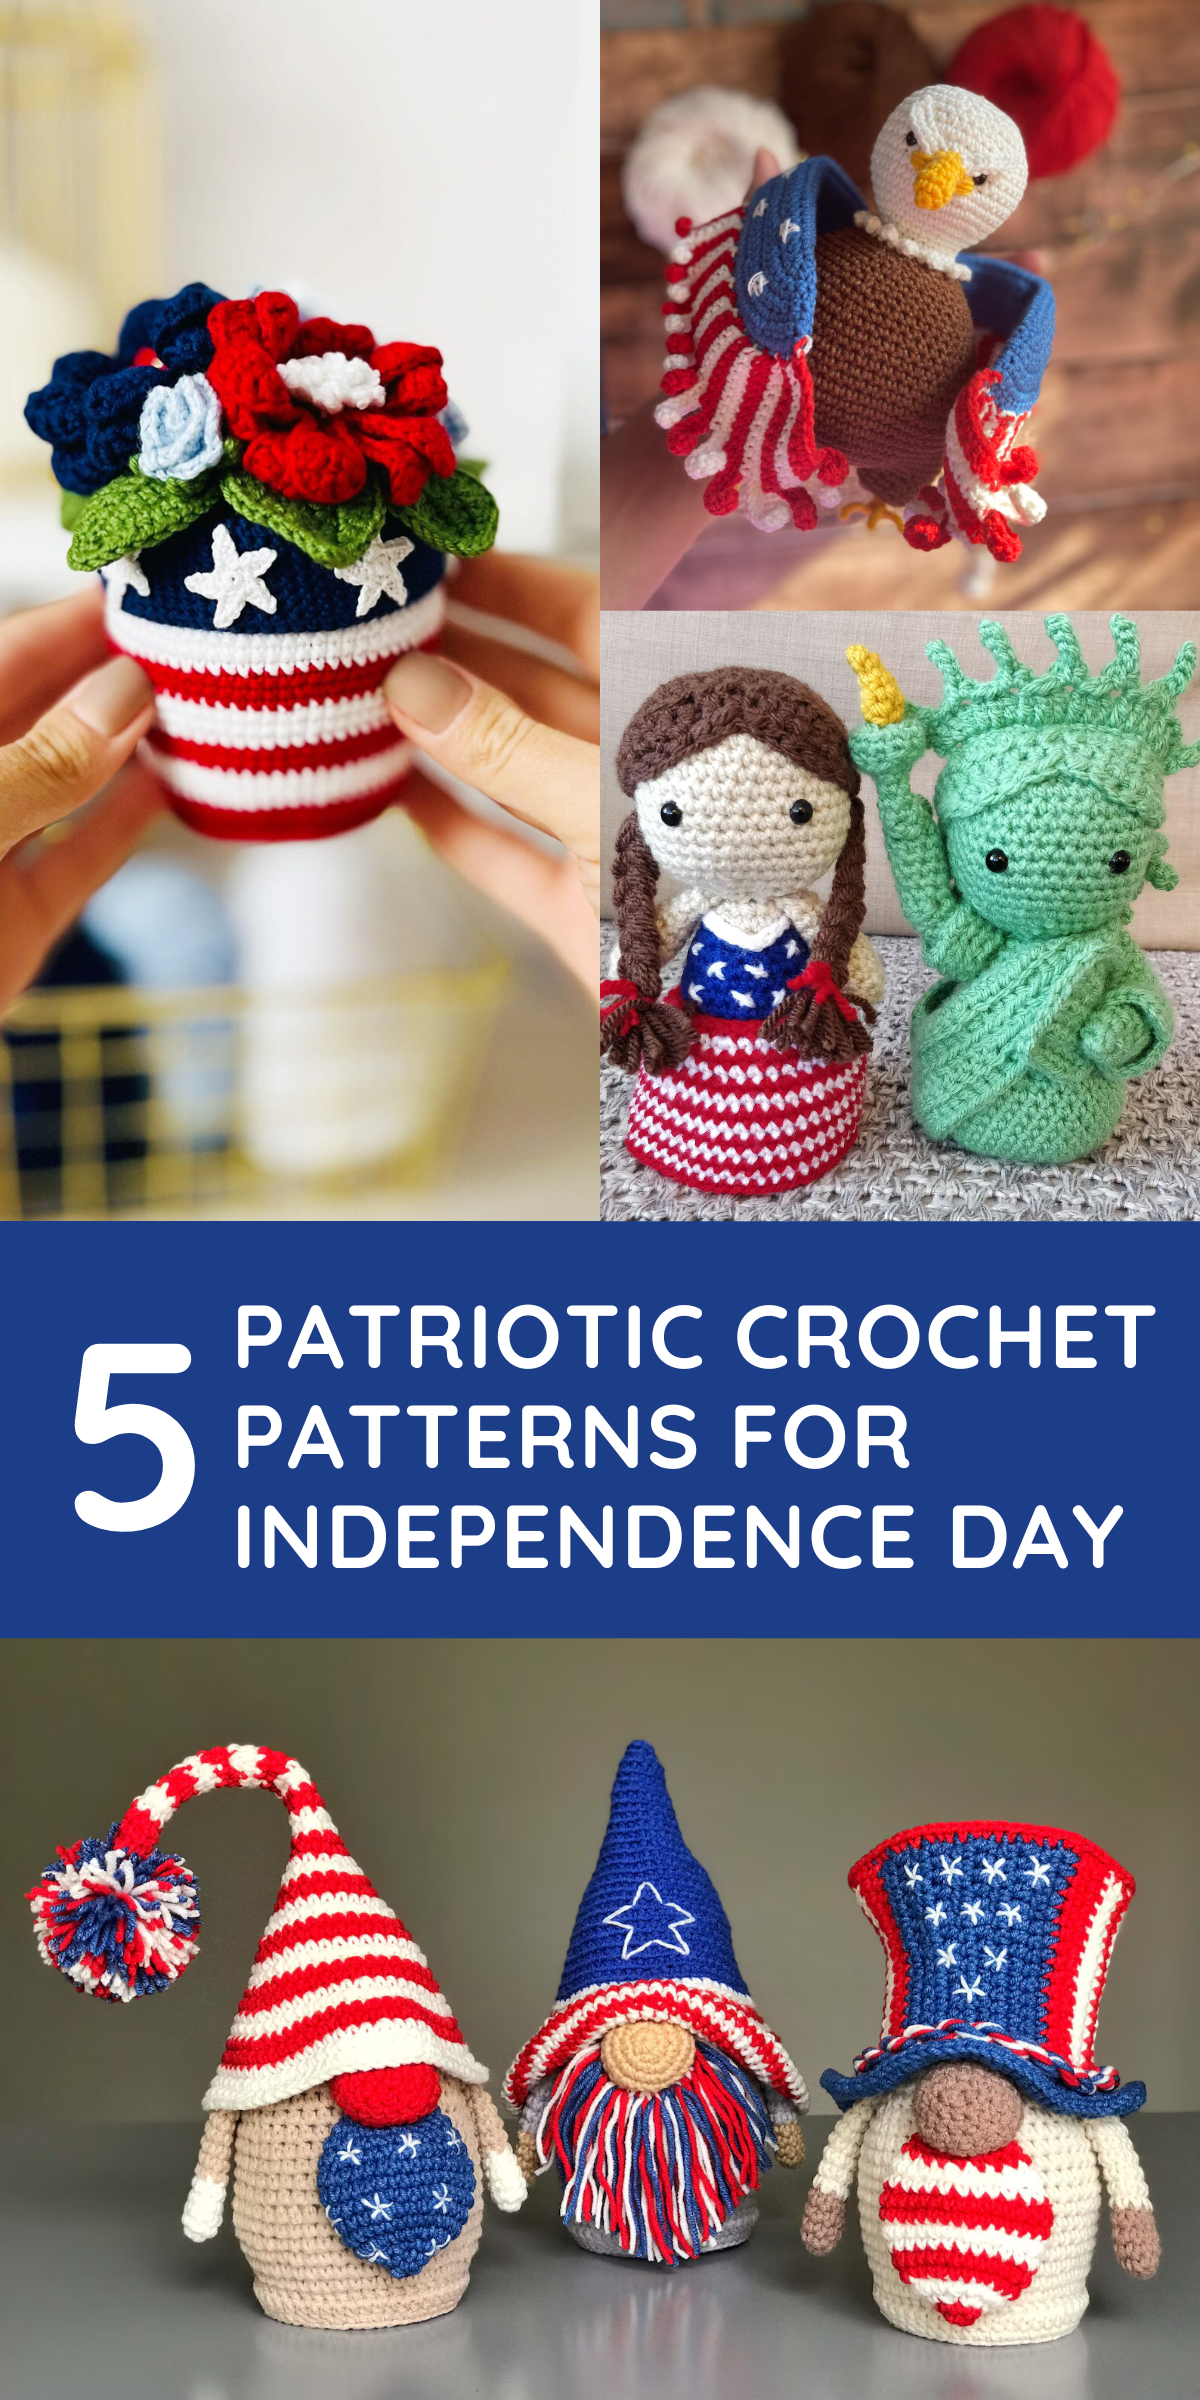 Get ready for Independence Day with these 5 festive crochet patterns! 🎆🧶 From cuddly toys to charming decor, we've got everything you need to celebrate in style. 🇺🇸✨